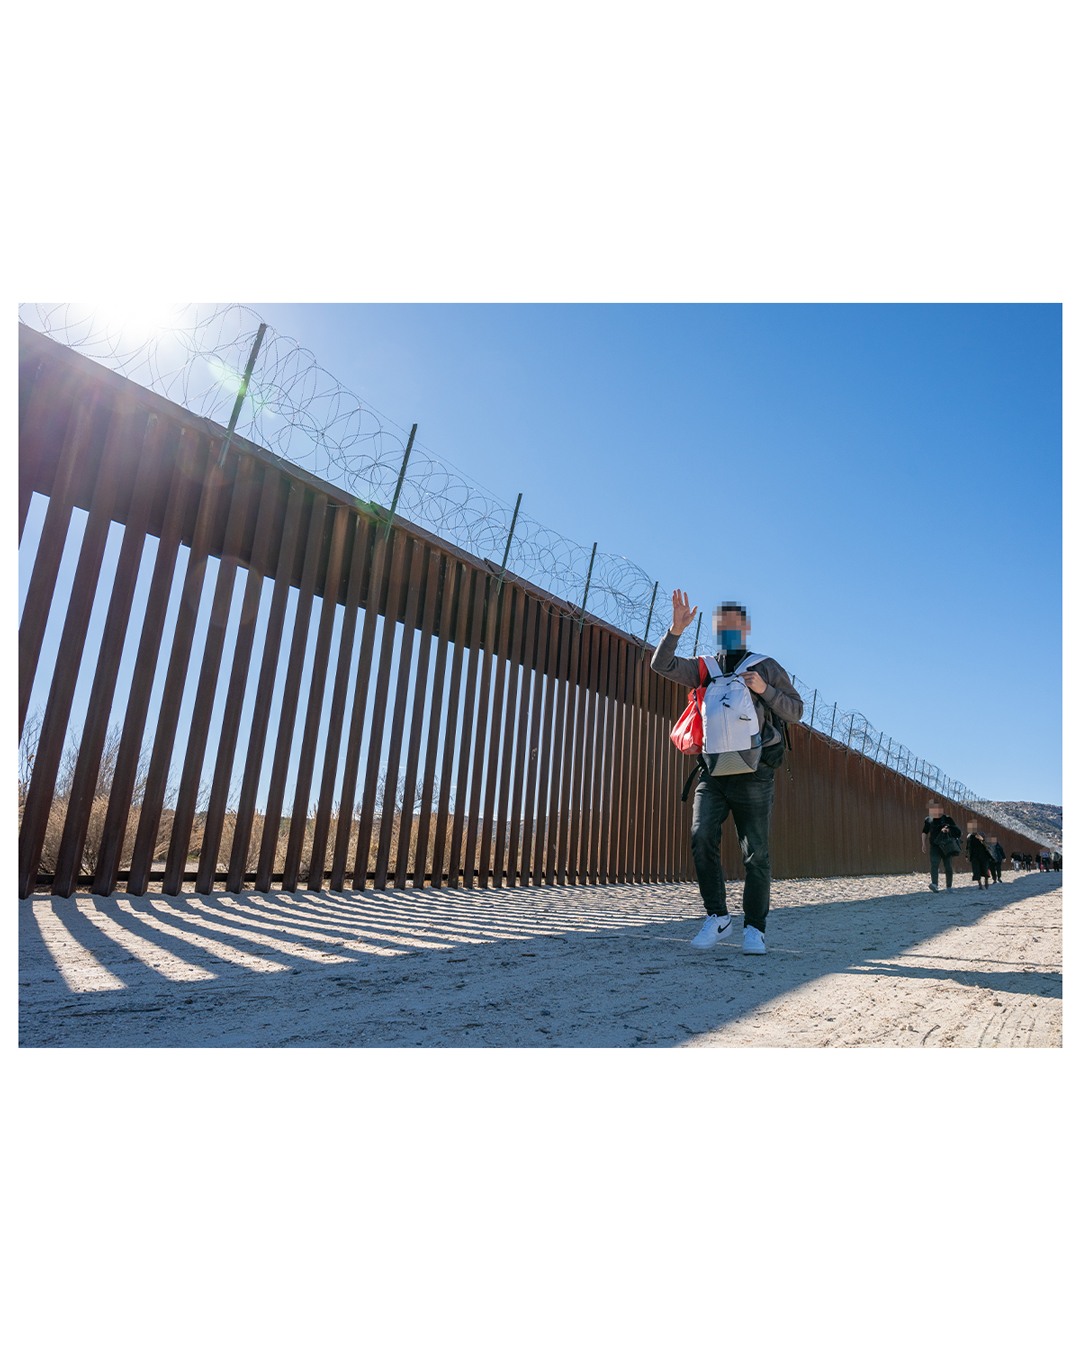 Against the slat metal border wall background, a young migrant waves to the camera. His backpack is worn backwards against his stomach, with a second bag draped over his shoulder. Other migrants walk the same path in the distance.